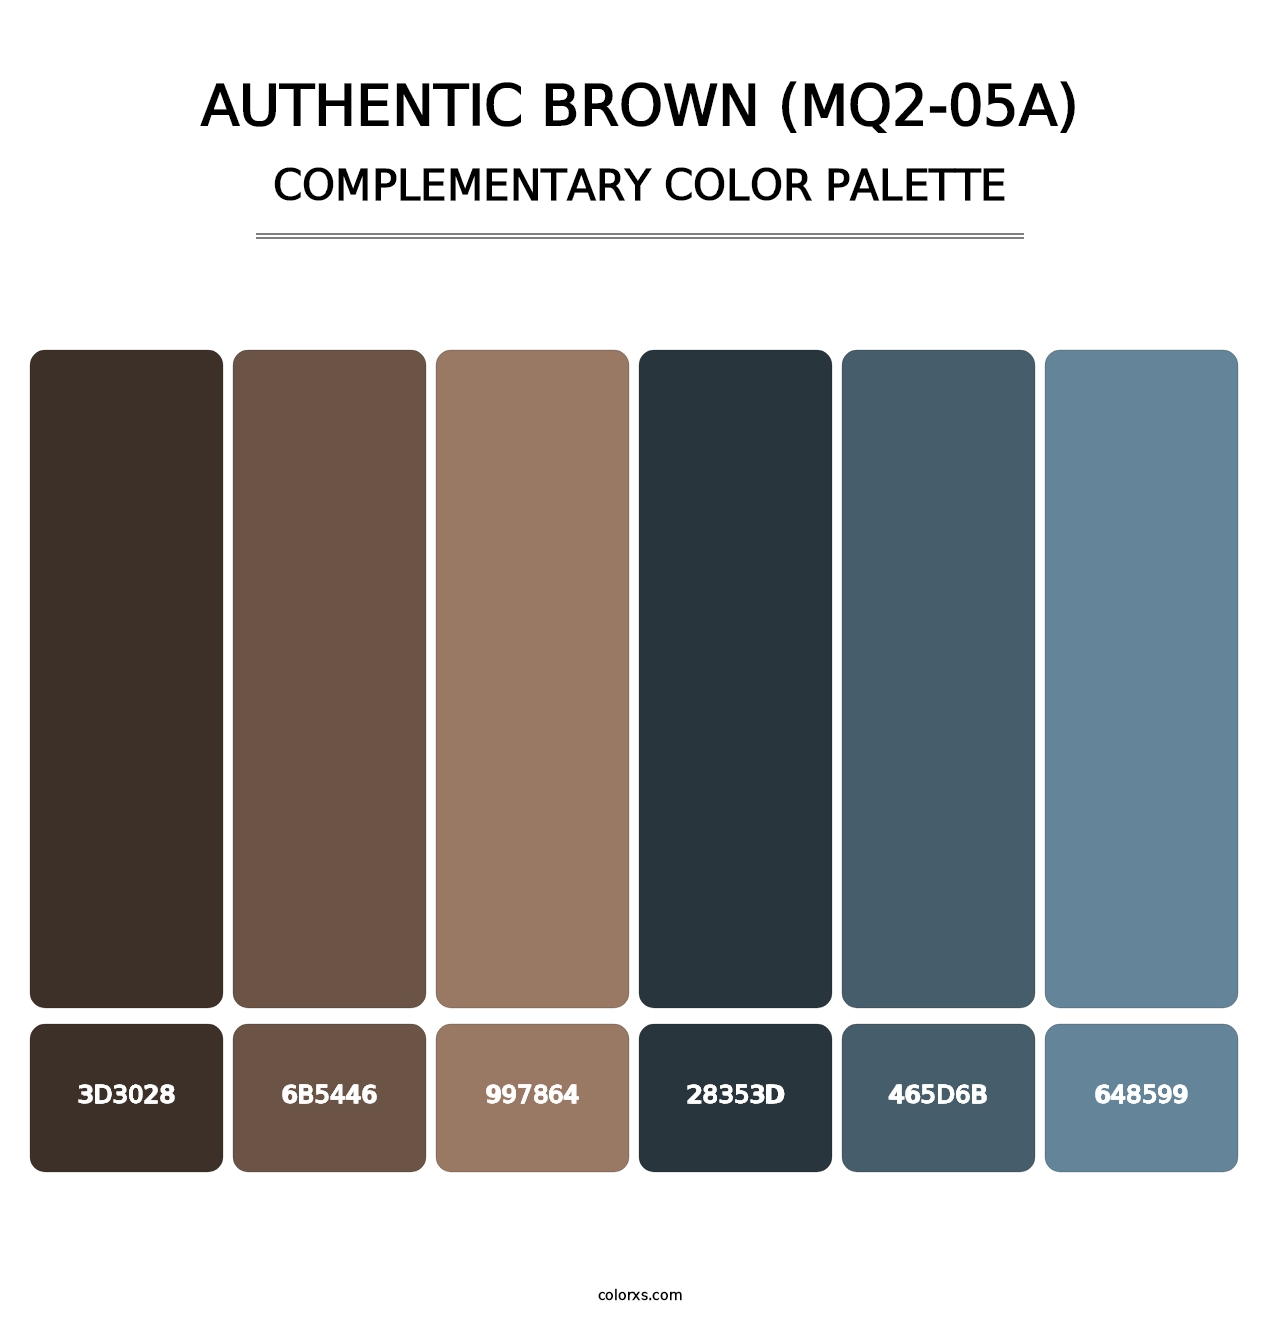 Authentic Brown (MQ2-05A) - Complementary Color Palette